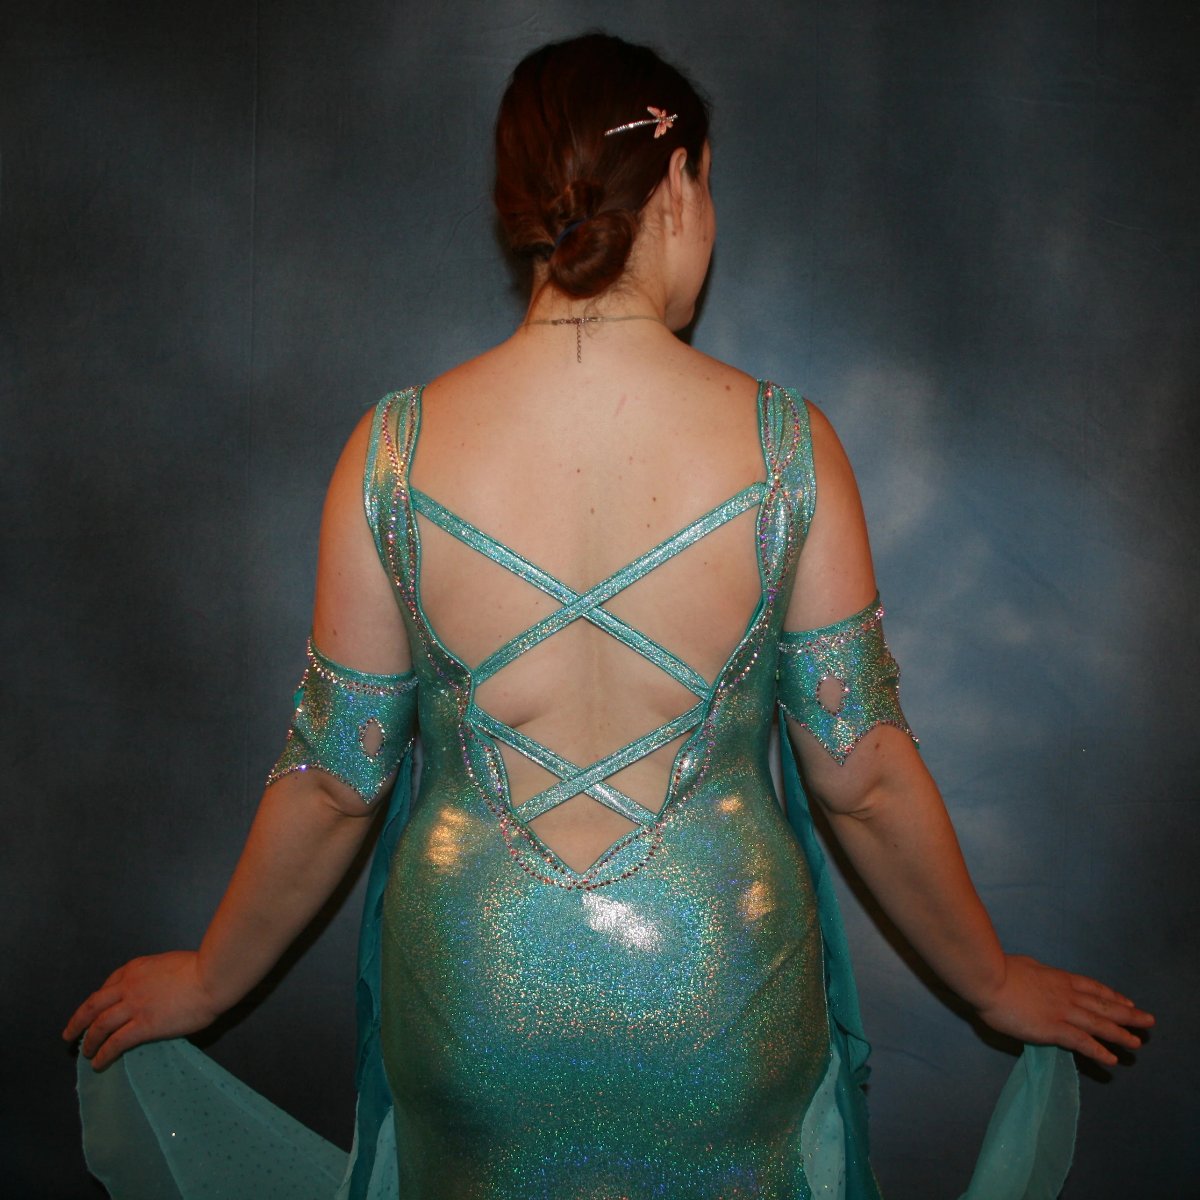 Crystal's Creations close up back view of Aqua Latin/rhythm dress created of gorgeous hologram base with flounces of aqua champagne sequin chiffon & teal glitter chiffon, embellished with CAB Swarovski stone work, with strap detailing on back. I envision this magical dress a gorgeous rumba, bolero or even a great solo dress for a waltz or foxtrot….or for an all around division.